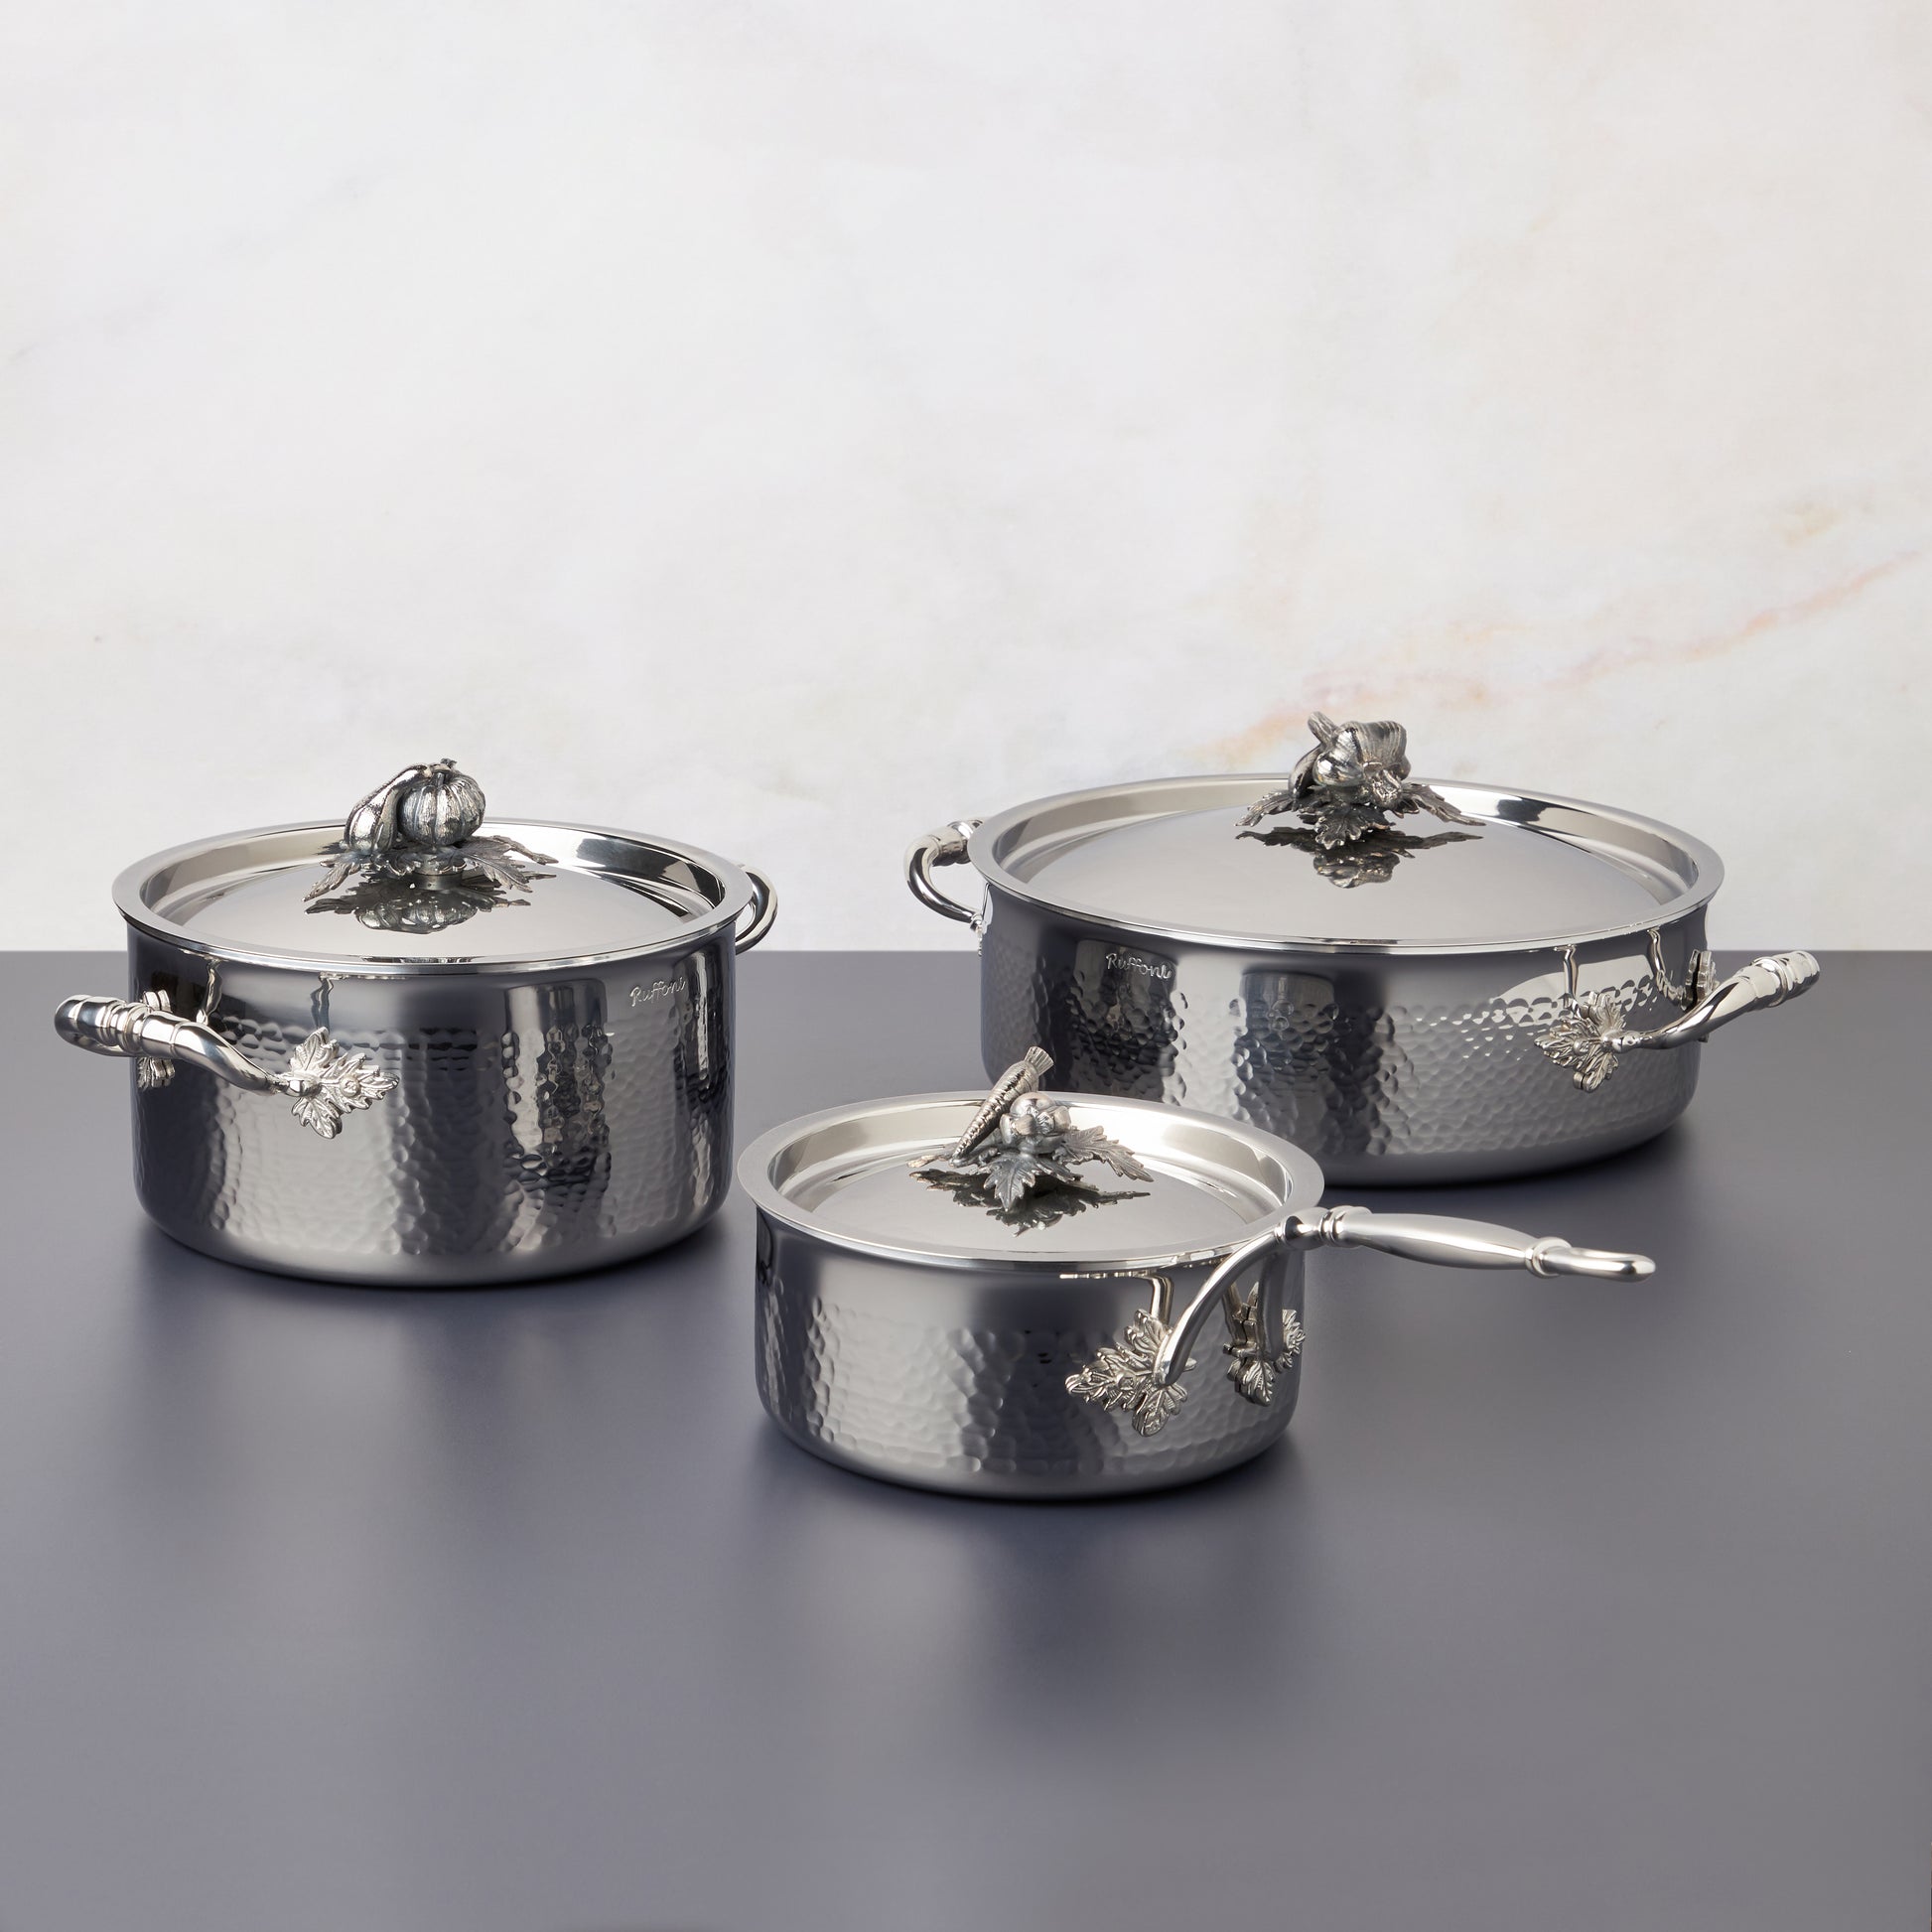 Opus Prima hammered clad stainless steel 6 piece cookware set with decorated silver-plated lid knob finial from Ruffoni